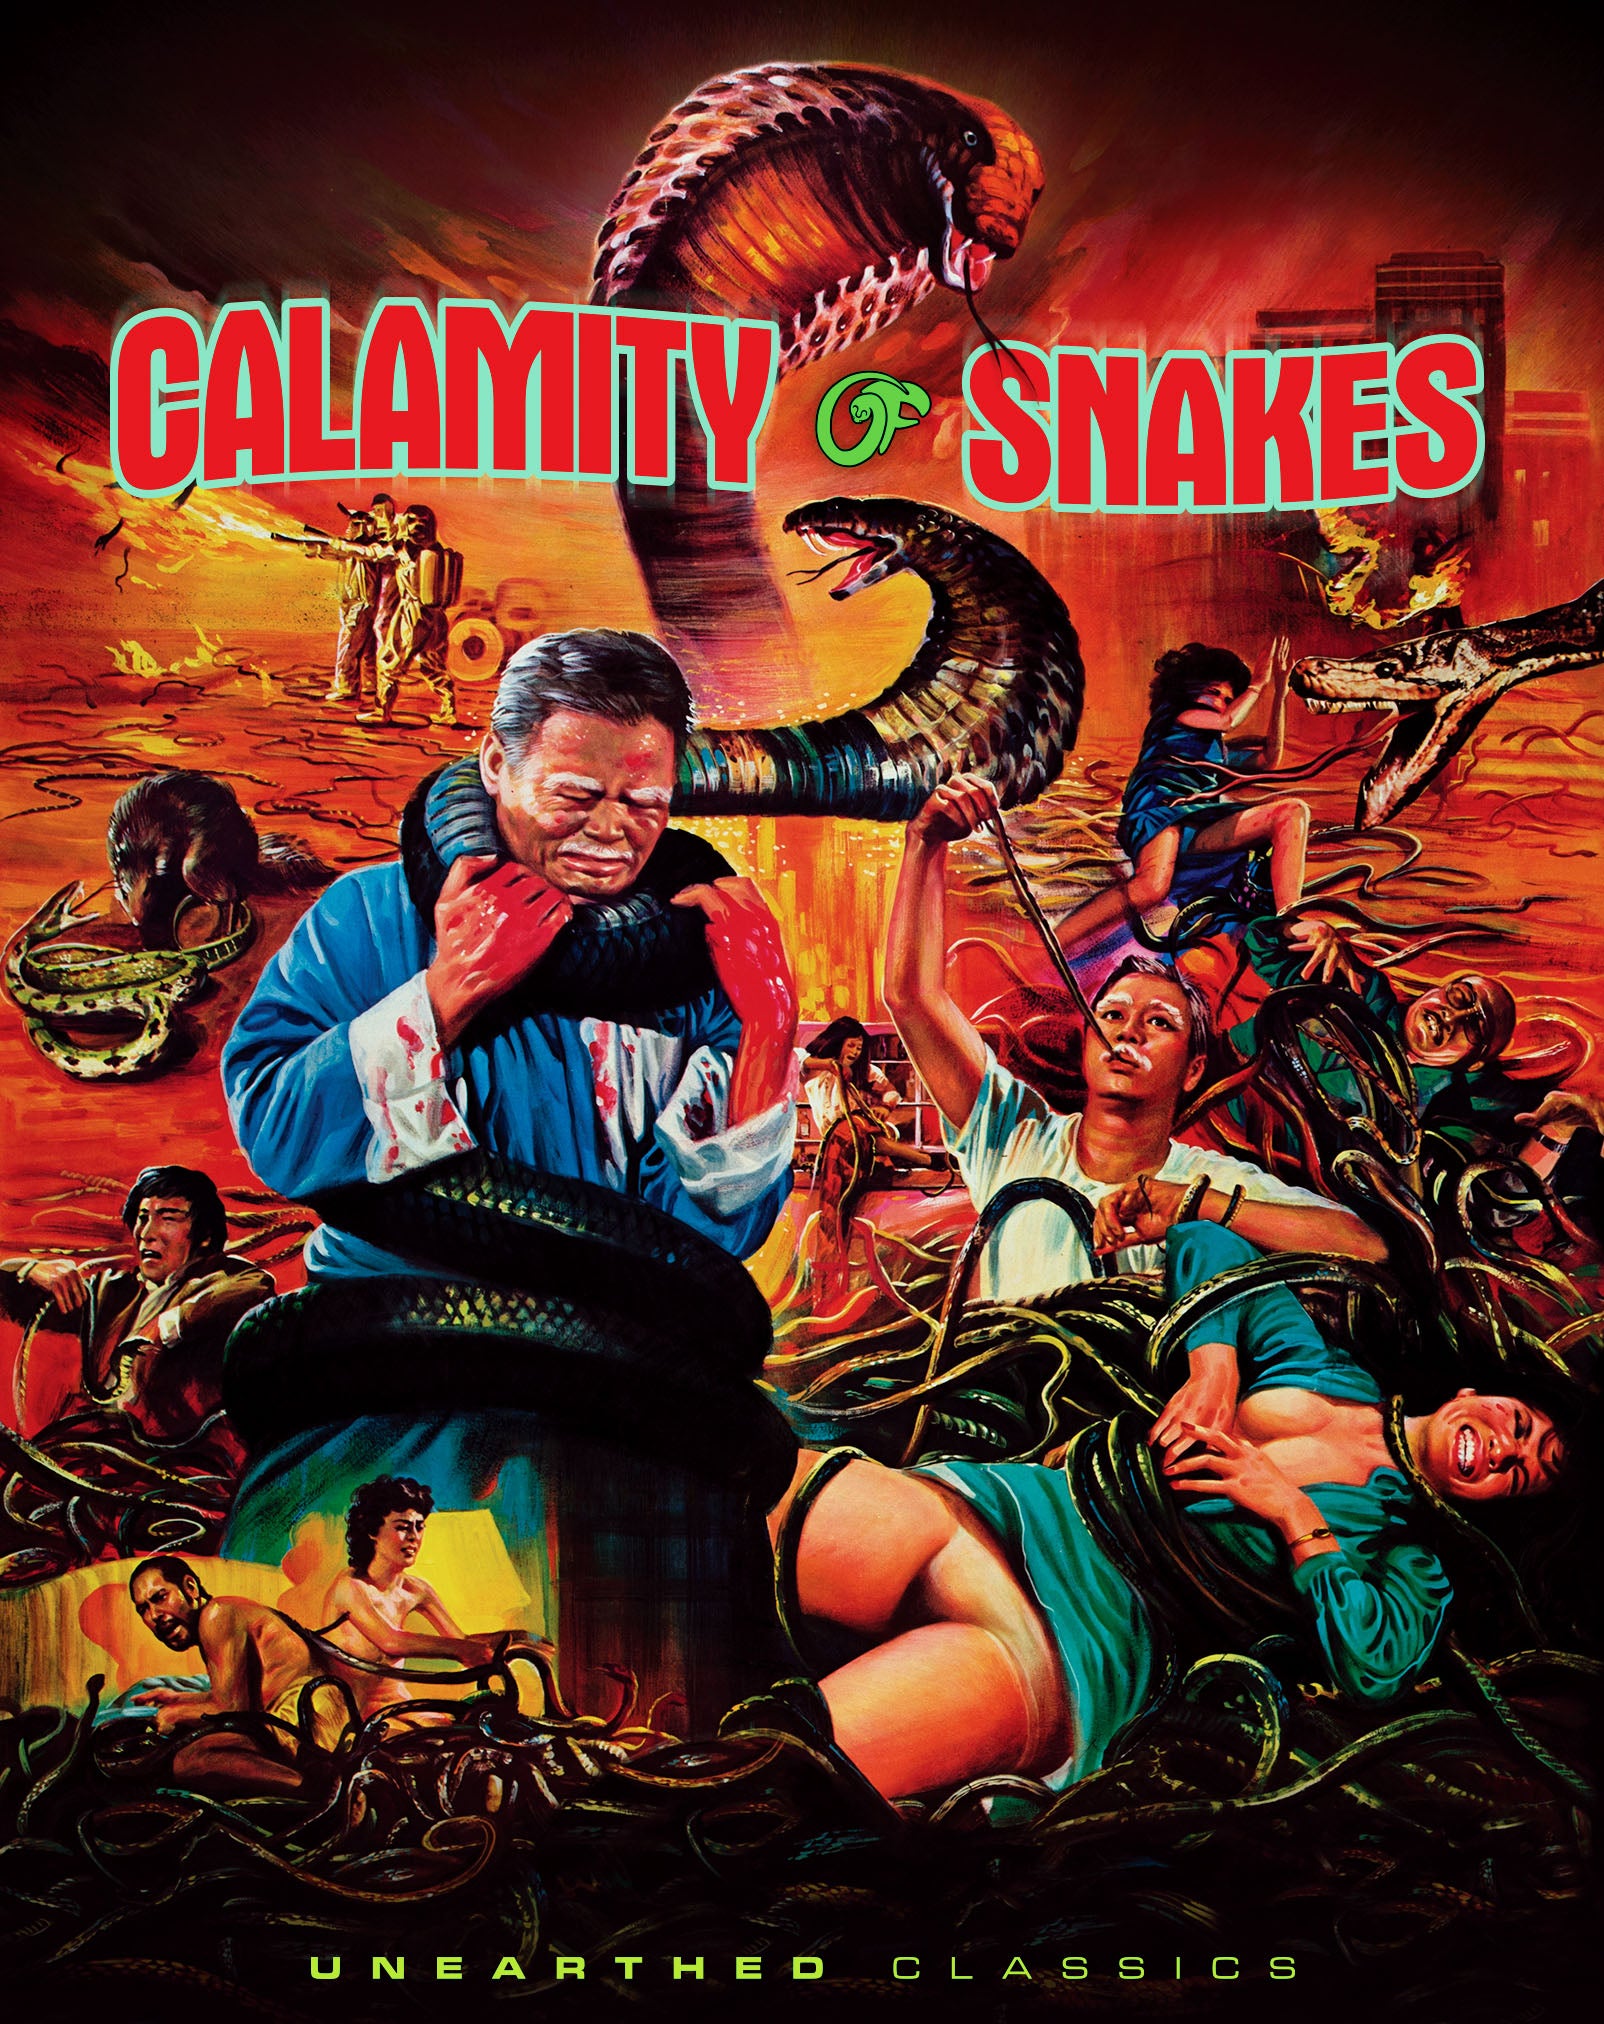 CALAMITY OF SNAKES BLU-RAY